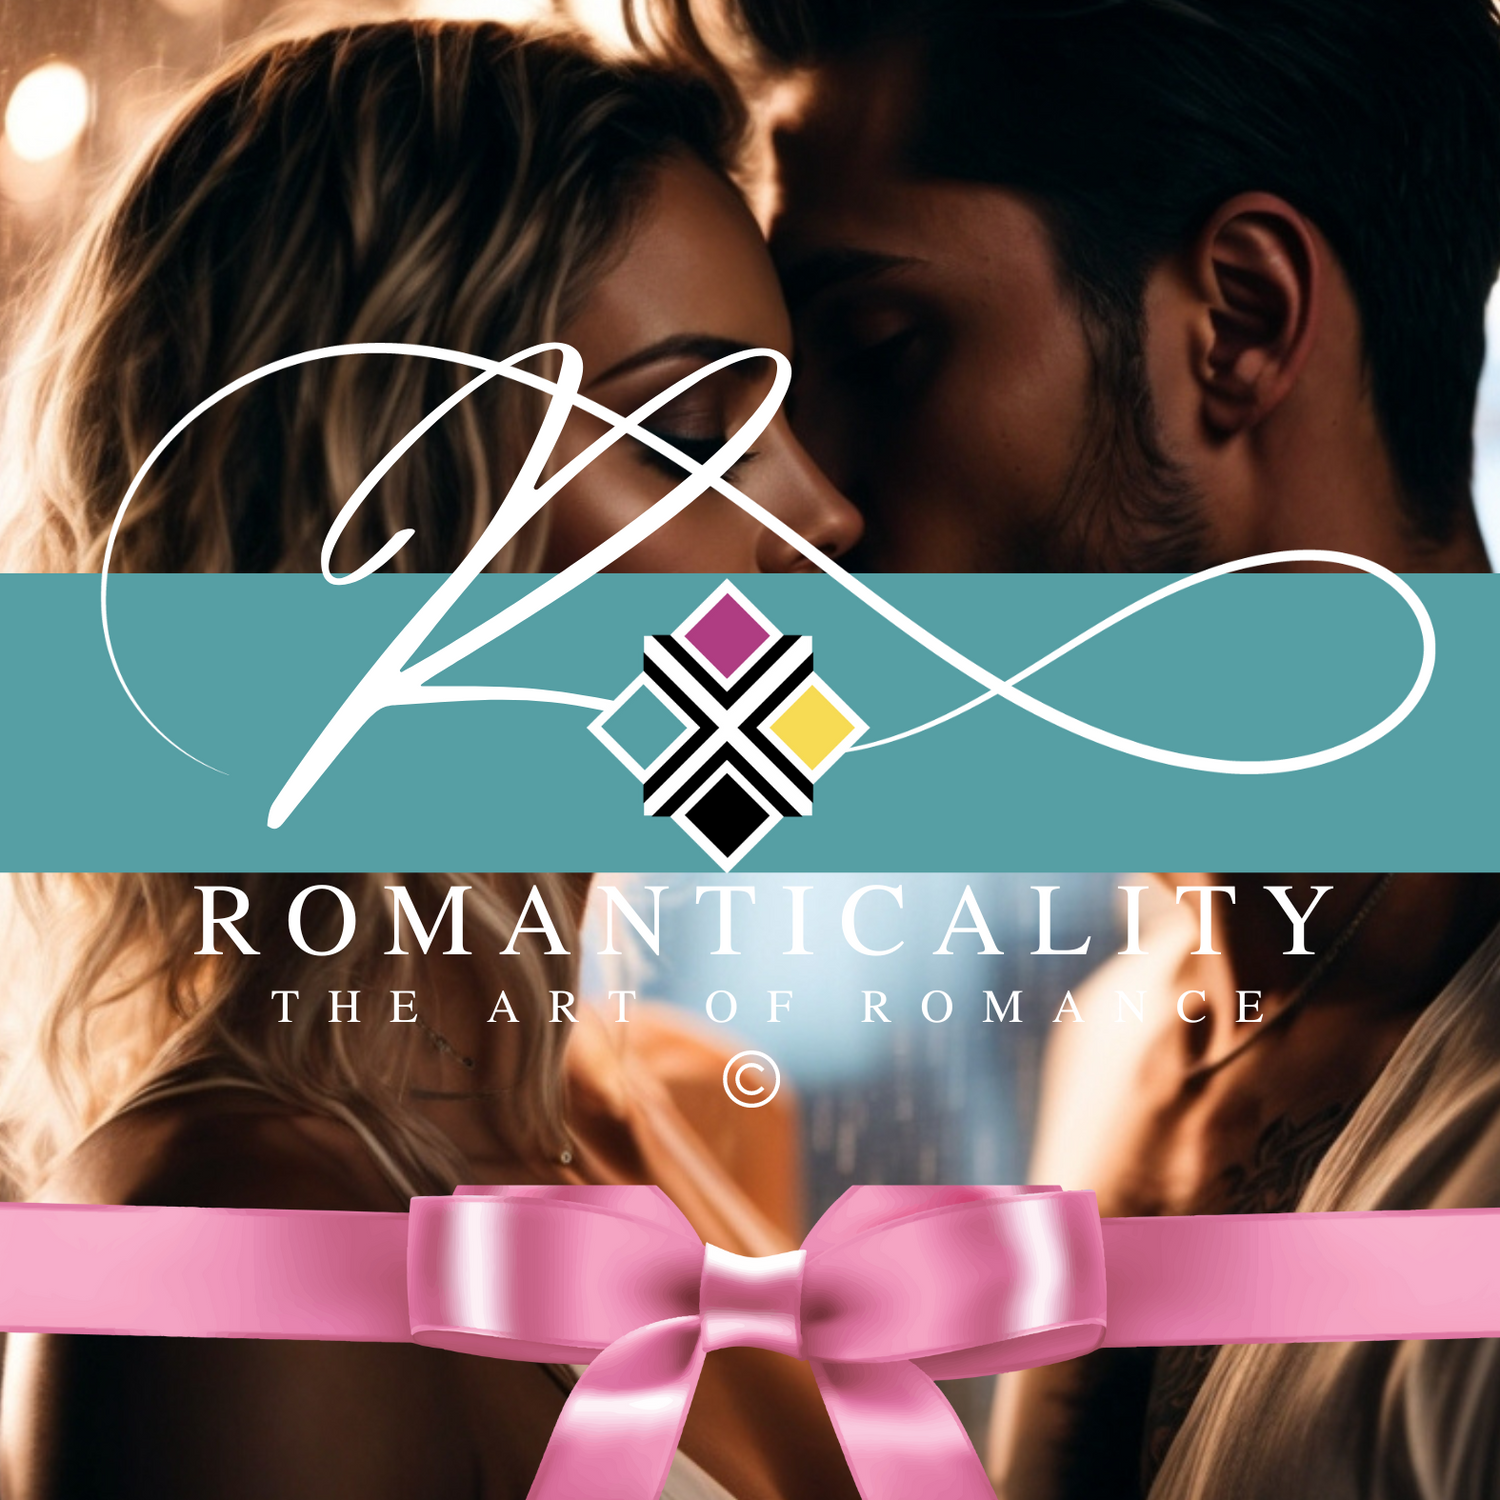 BOOK COVER IMAGES FOR ROMANTIC FICTION